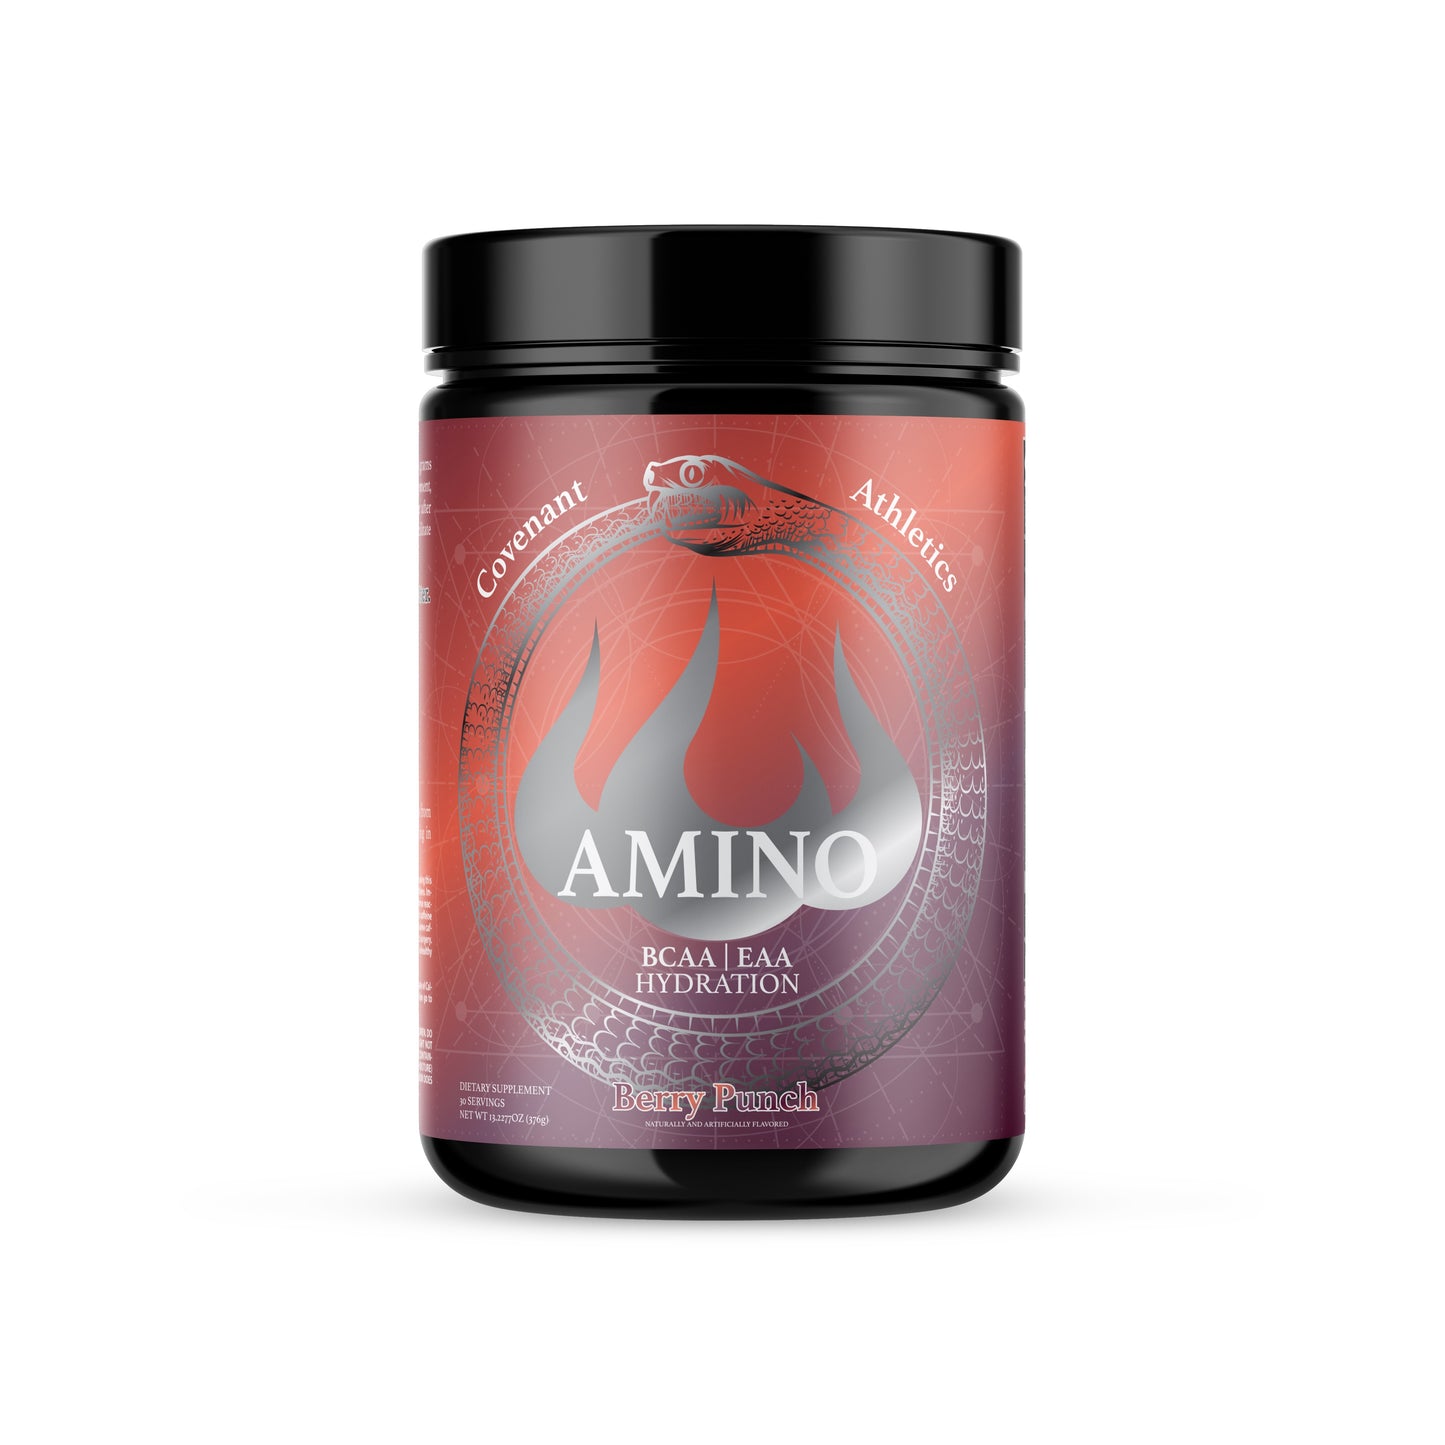 Covenant Aminos "Berry Punch"